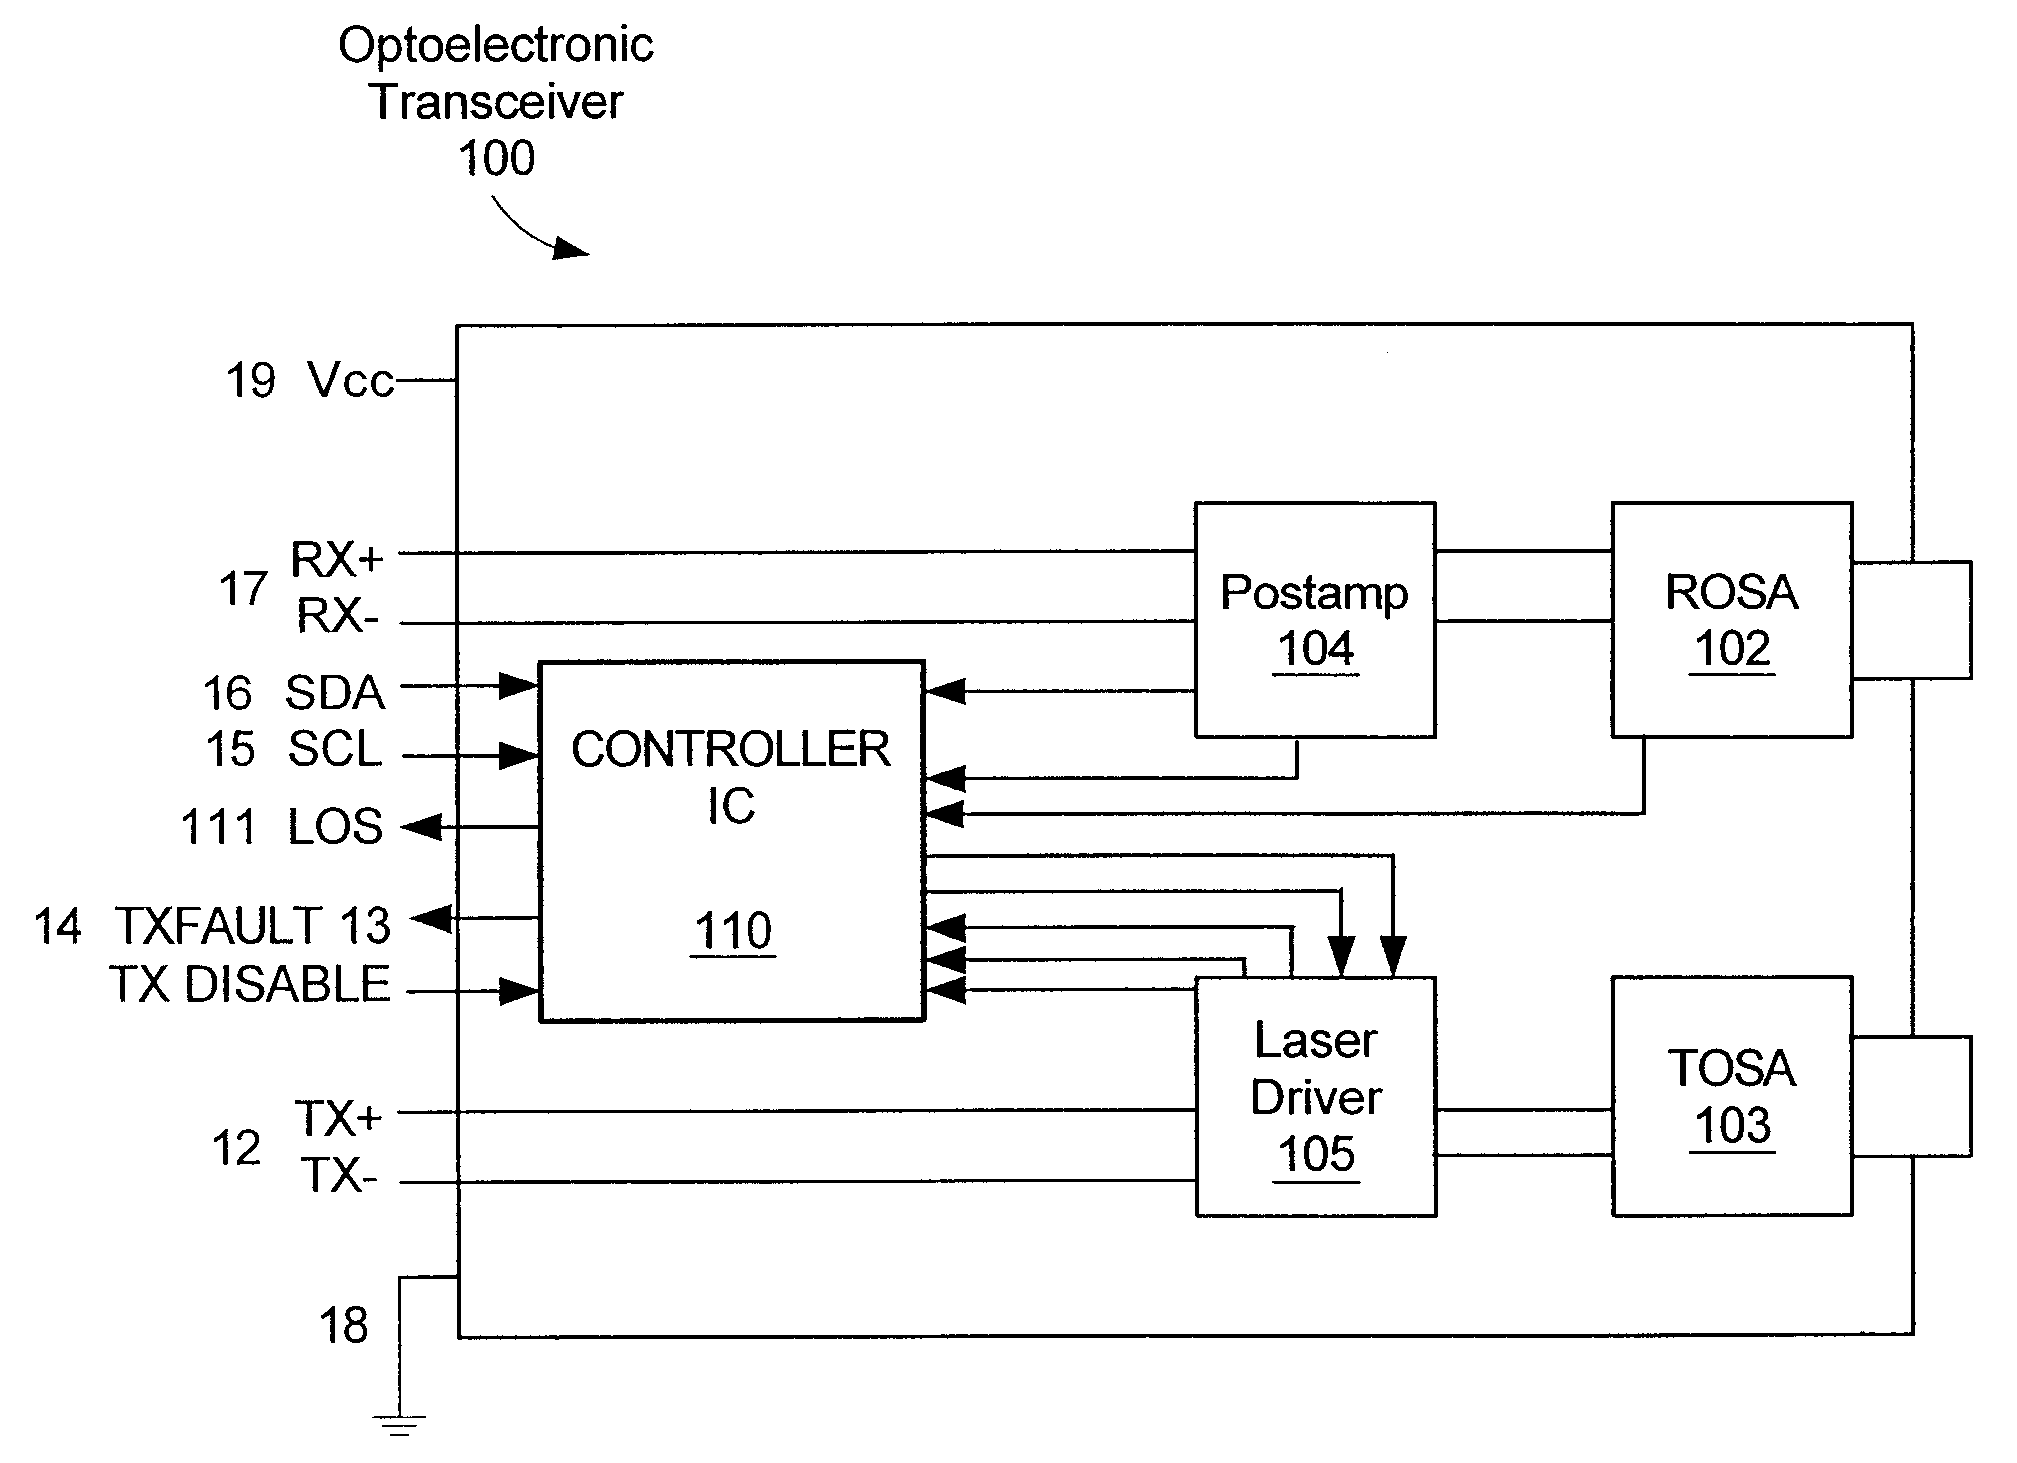 Optoelectronic Transceiver Having Dual Access to Onboard Diagnostics